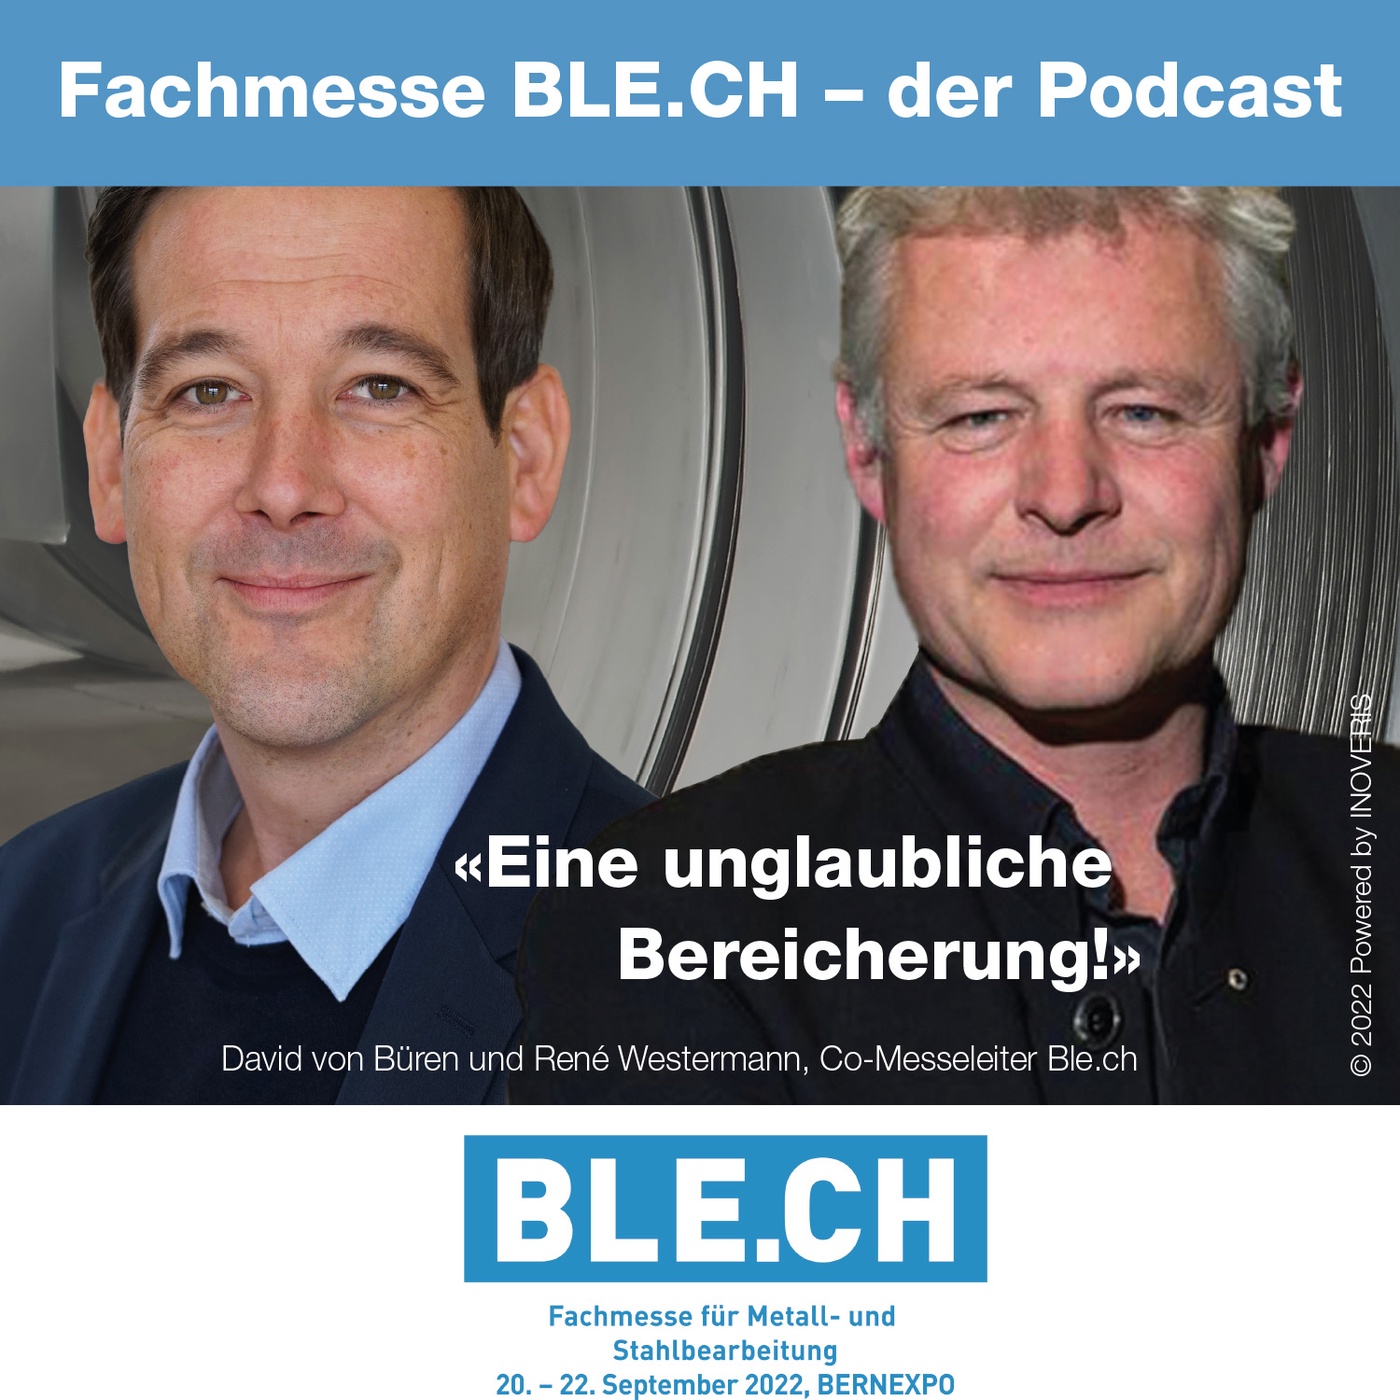 Fachmesse BLE.CH - der Podcast #1